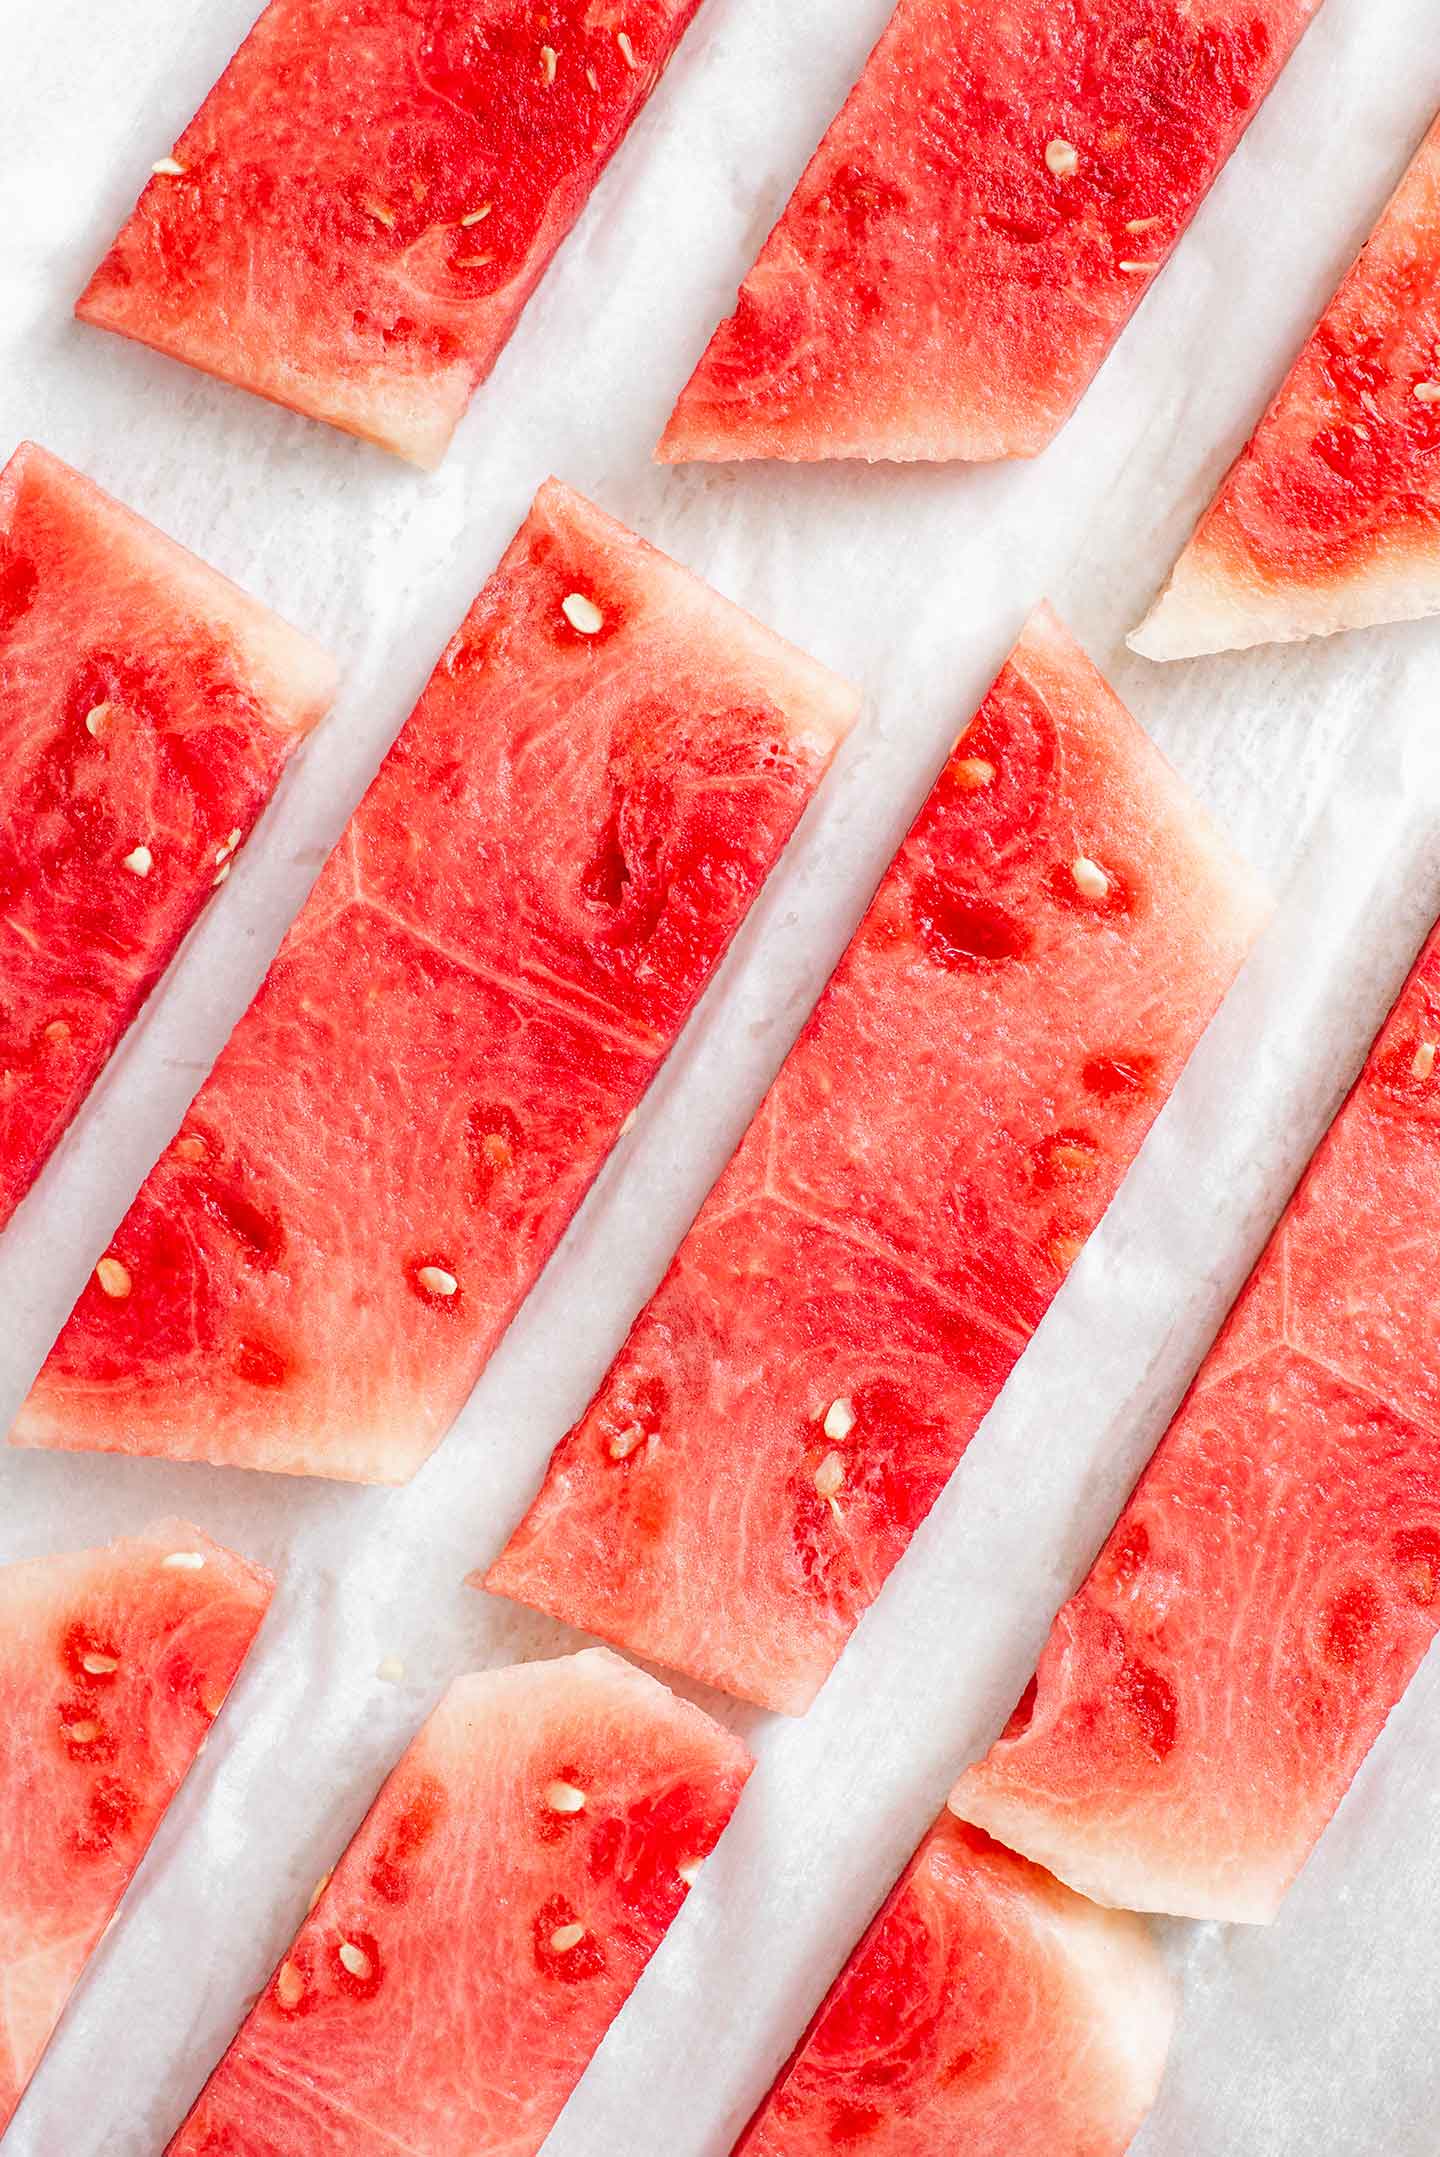 Top down view of rectangular slices of watermelon on a baking sheet.